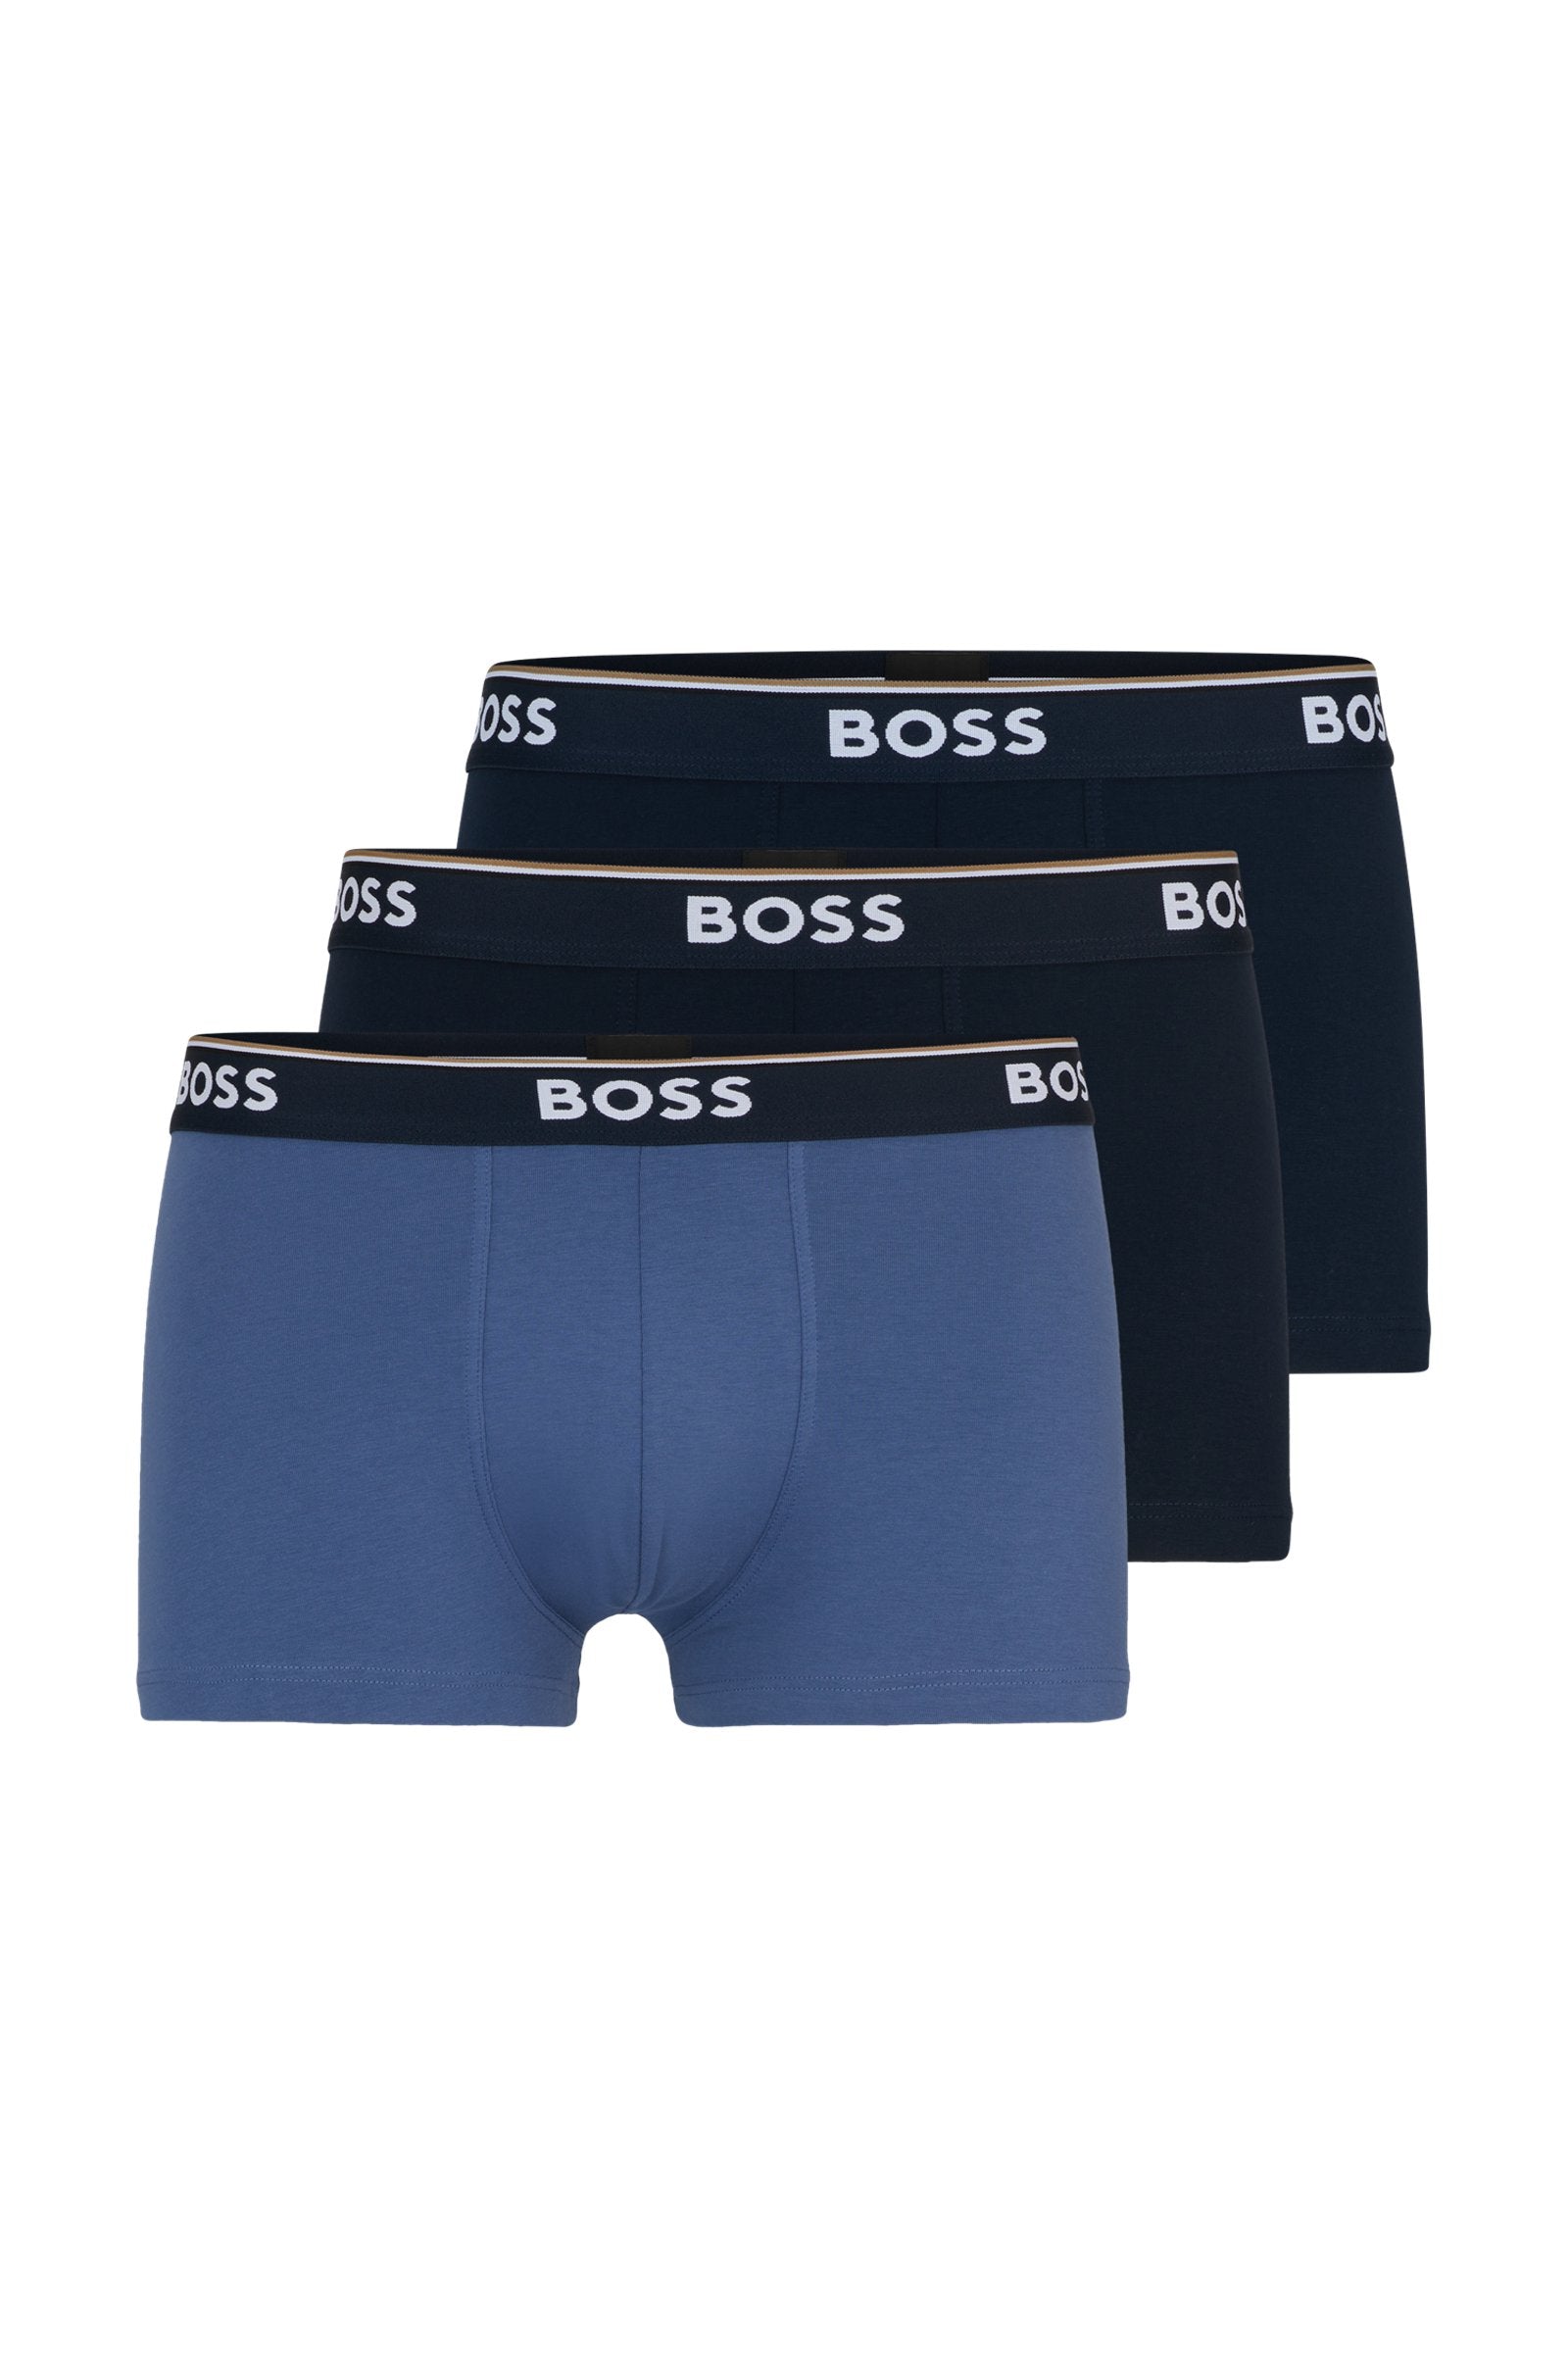 BOSS - Boxed 3-Pack Of Cotton Trunks With Logo Waistbands 50508985 987